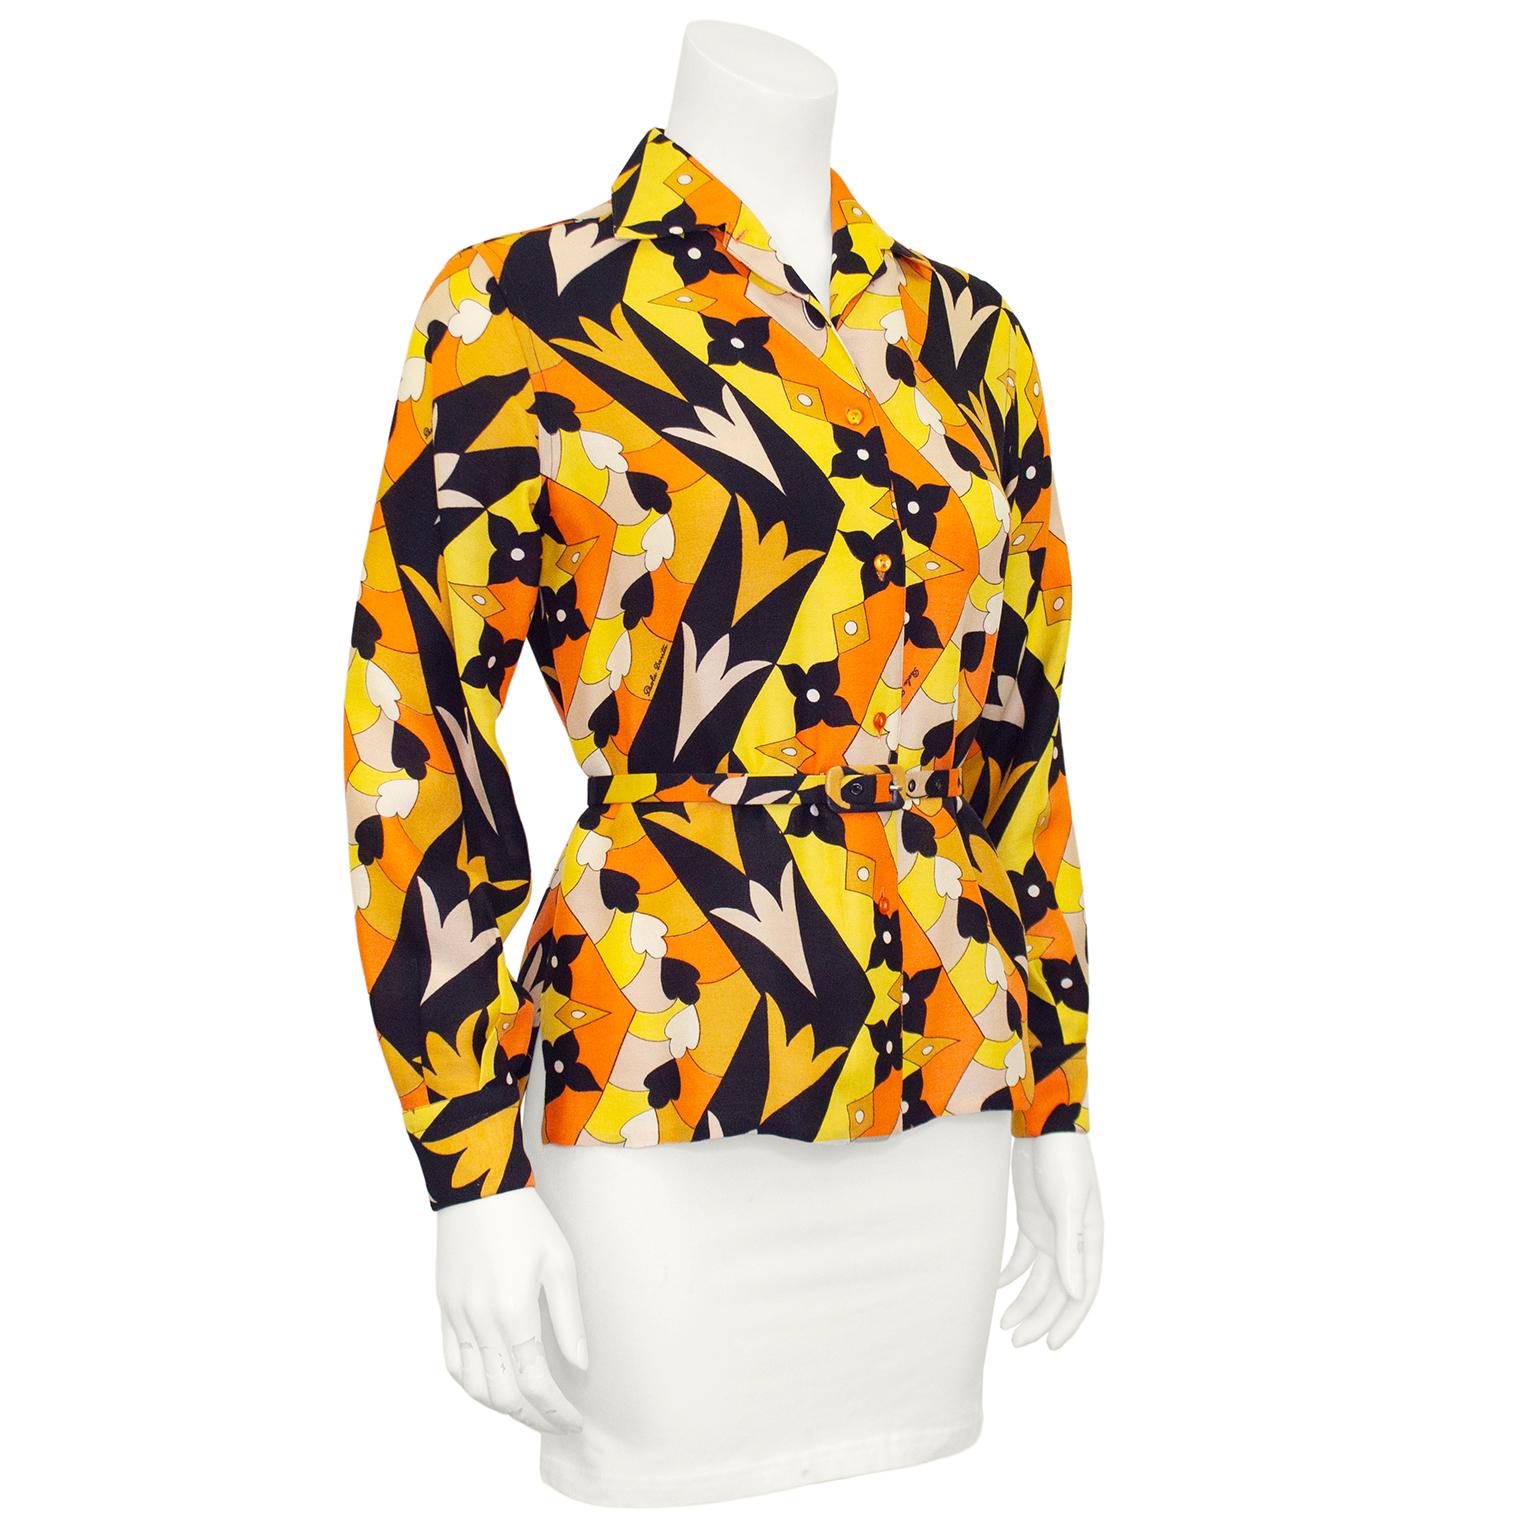 1970s Pucci-esque printed blouse by Paola Davitti Firenze. Orange, yellow, black and cream all over geometric signed print. High, shallow collar, small orange buttons and small slits at both side seams. Optional matching thin belt at waist that adds